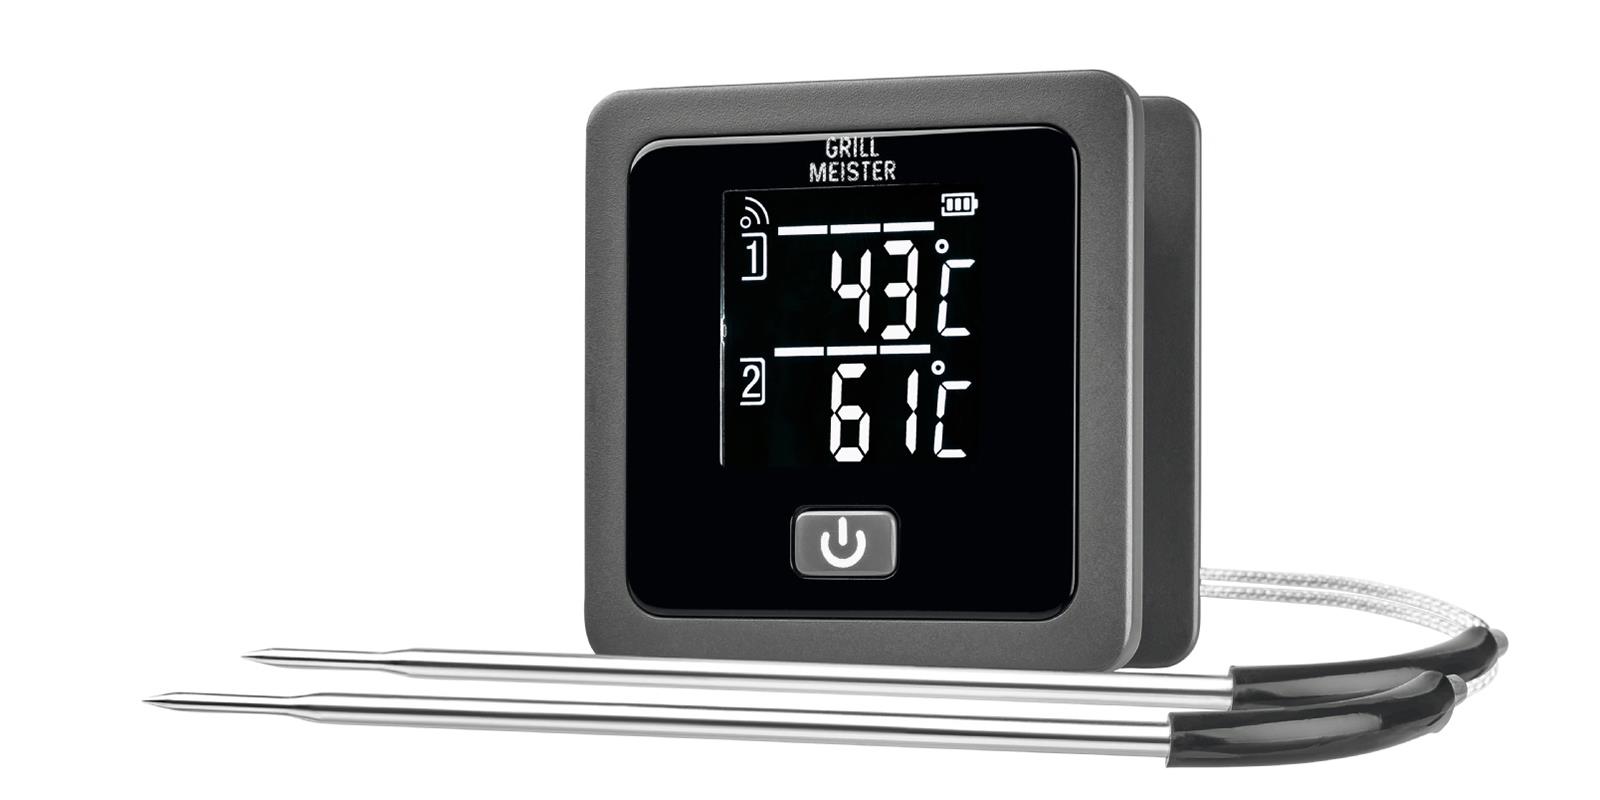 2.4 GRILLMEISTER GTGT funk-Grillthermometer